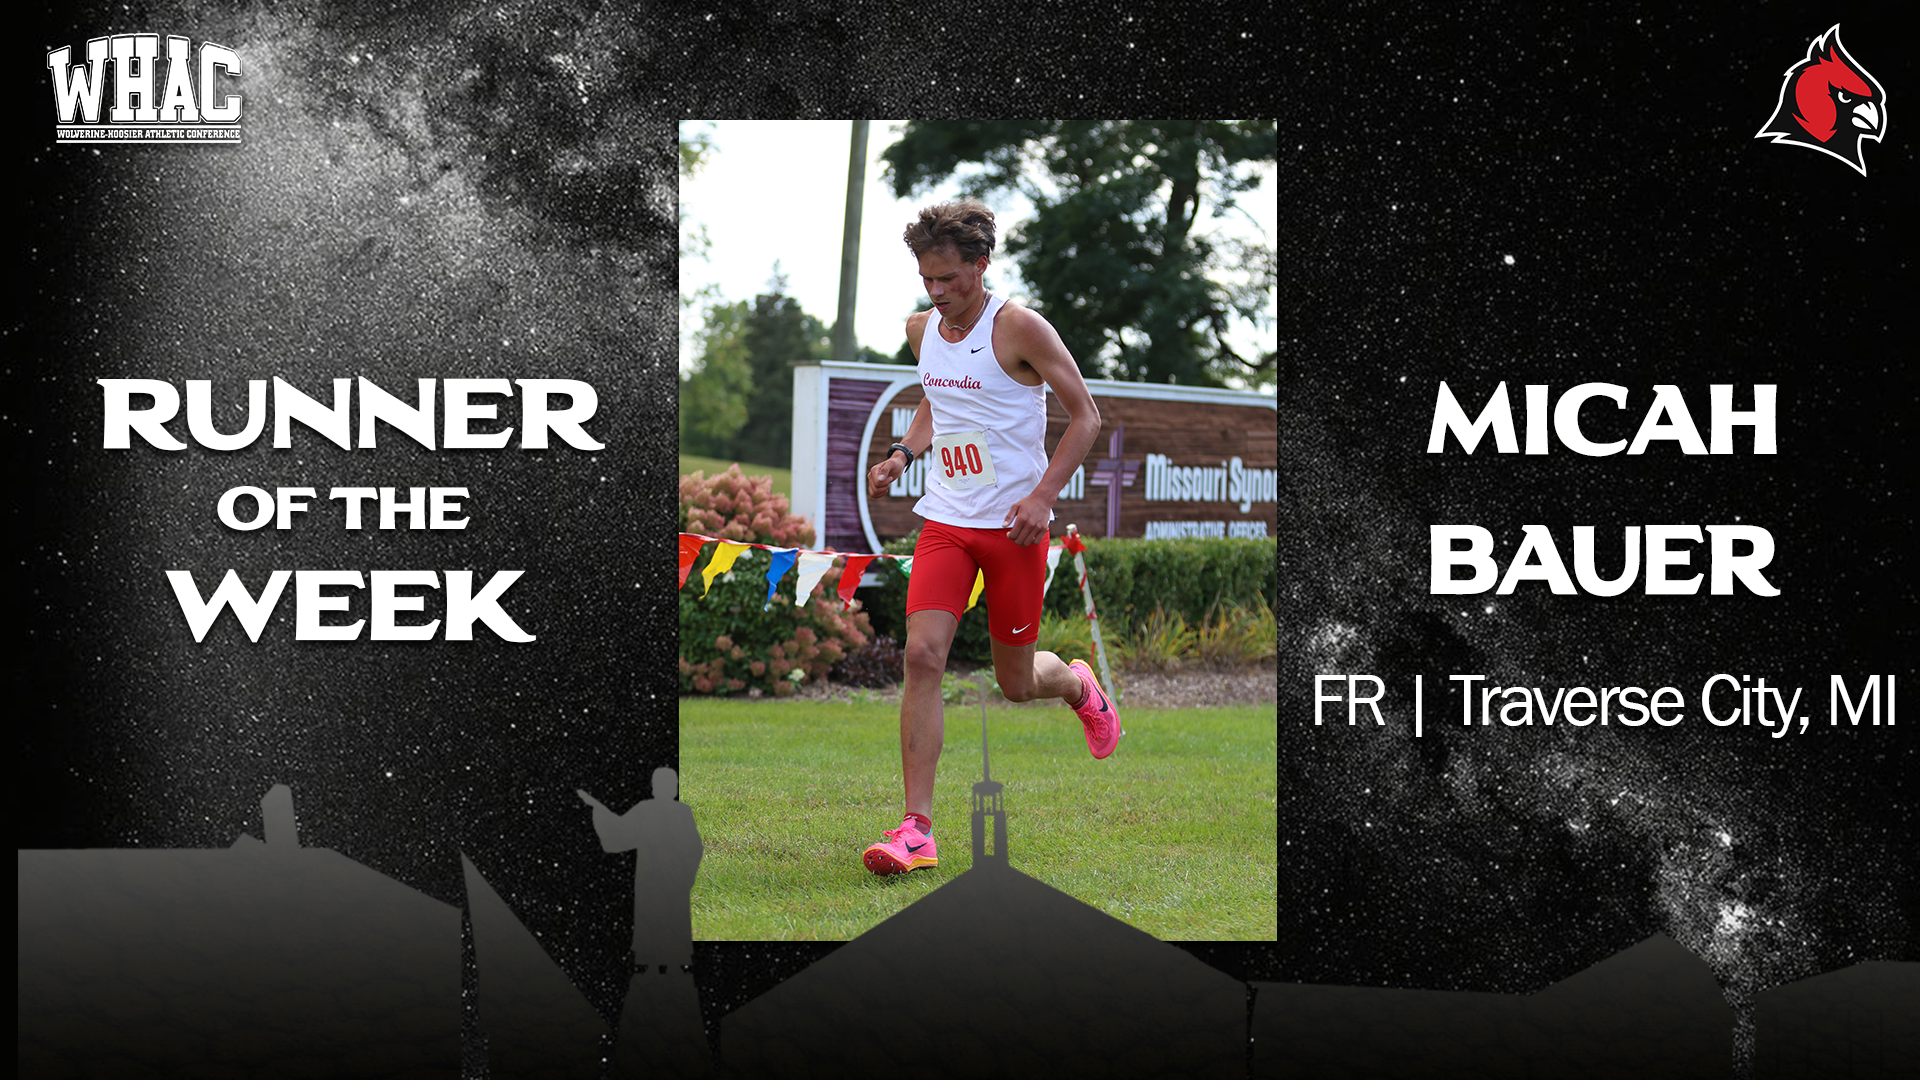 Men's Cross Country's Micah Bauer earns WHAC Runner of the Week